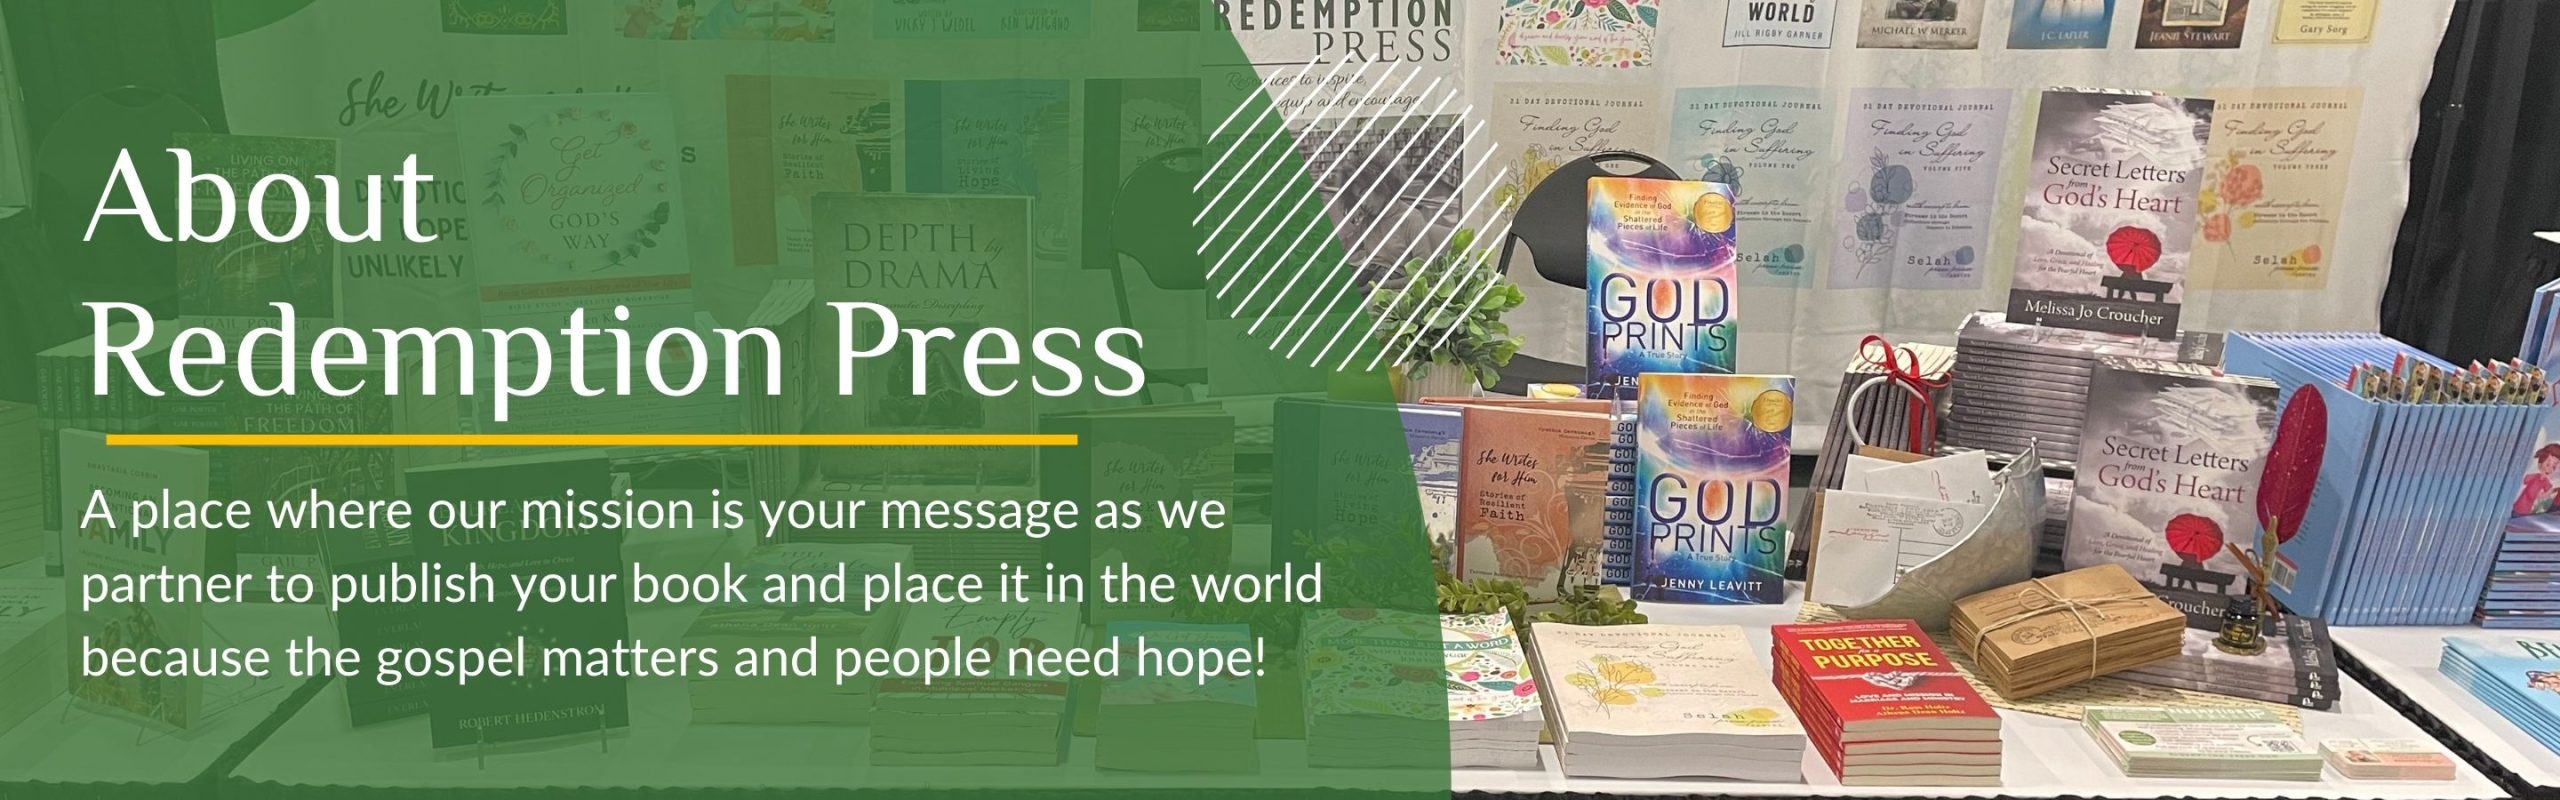 About Redemption Press - A Place where our mission is your message as we partner to publish your book and place it in the world because the gospel matters and people need hope!